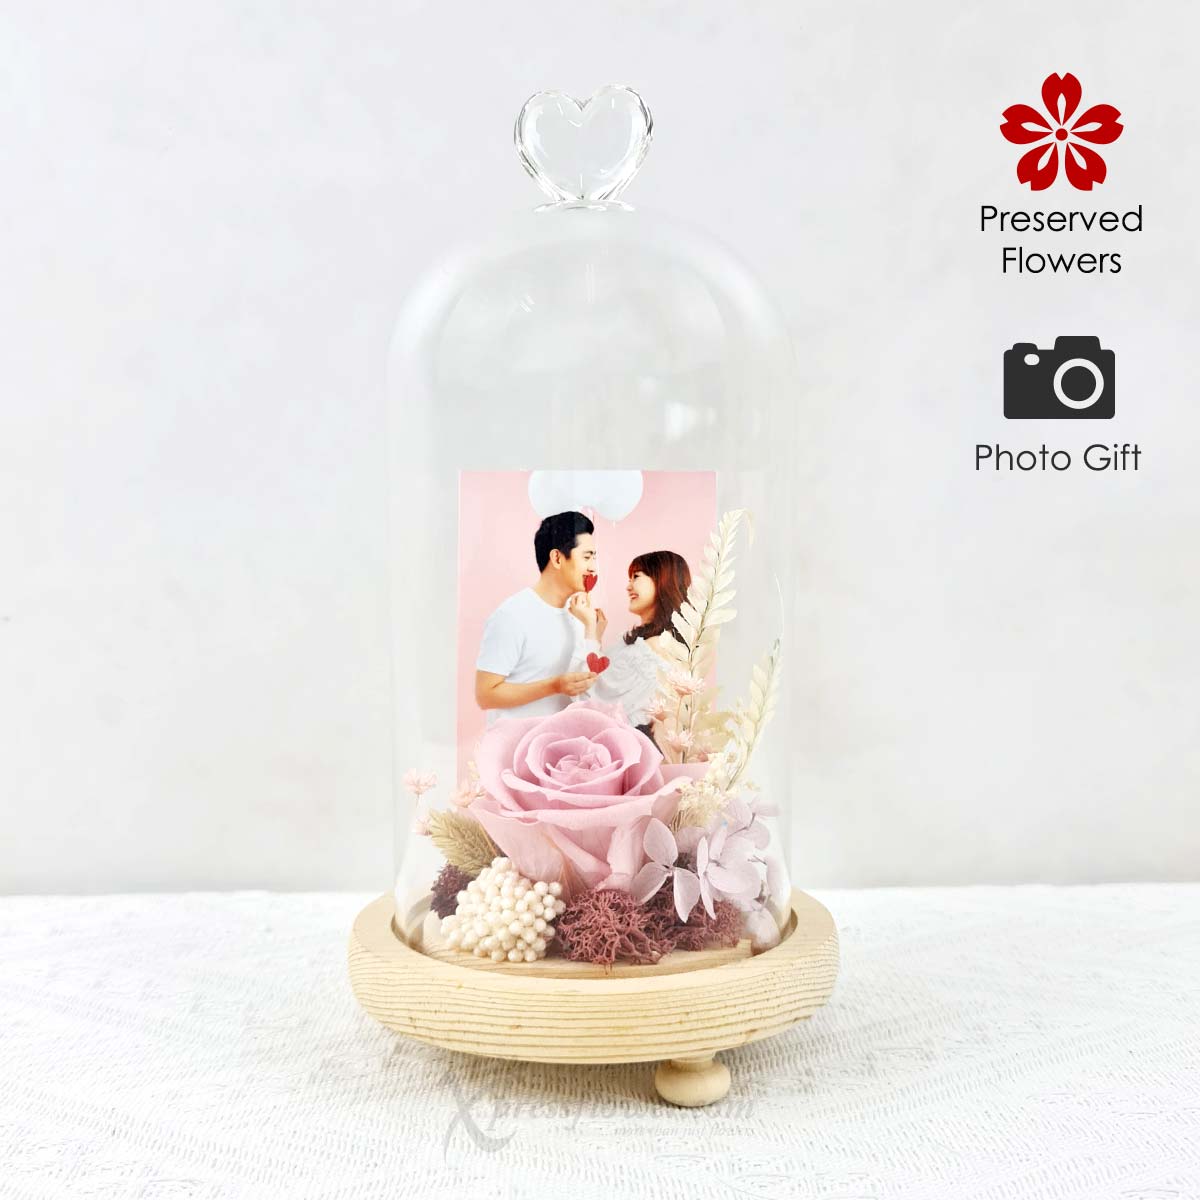 VDR2443_Lavender Blush Preserved Flowers with Personalised Photo_1C